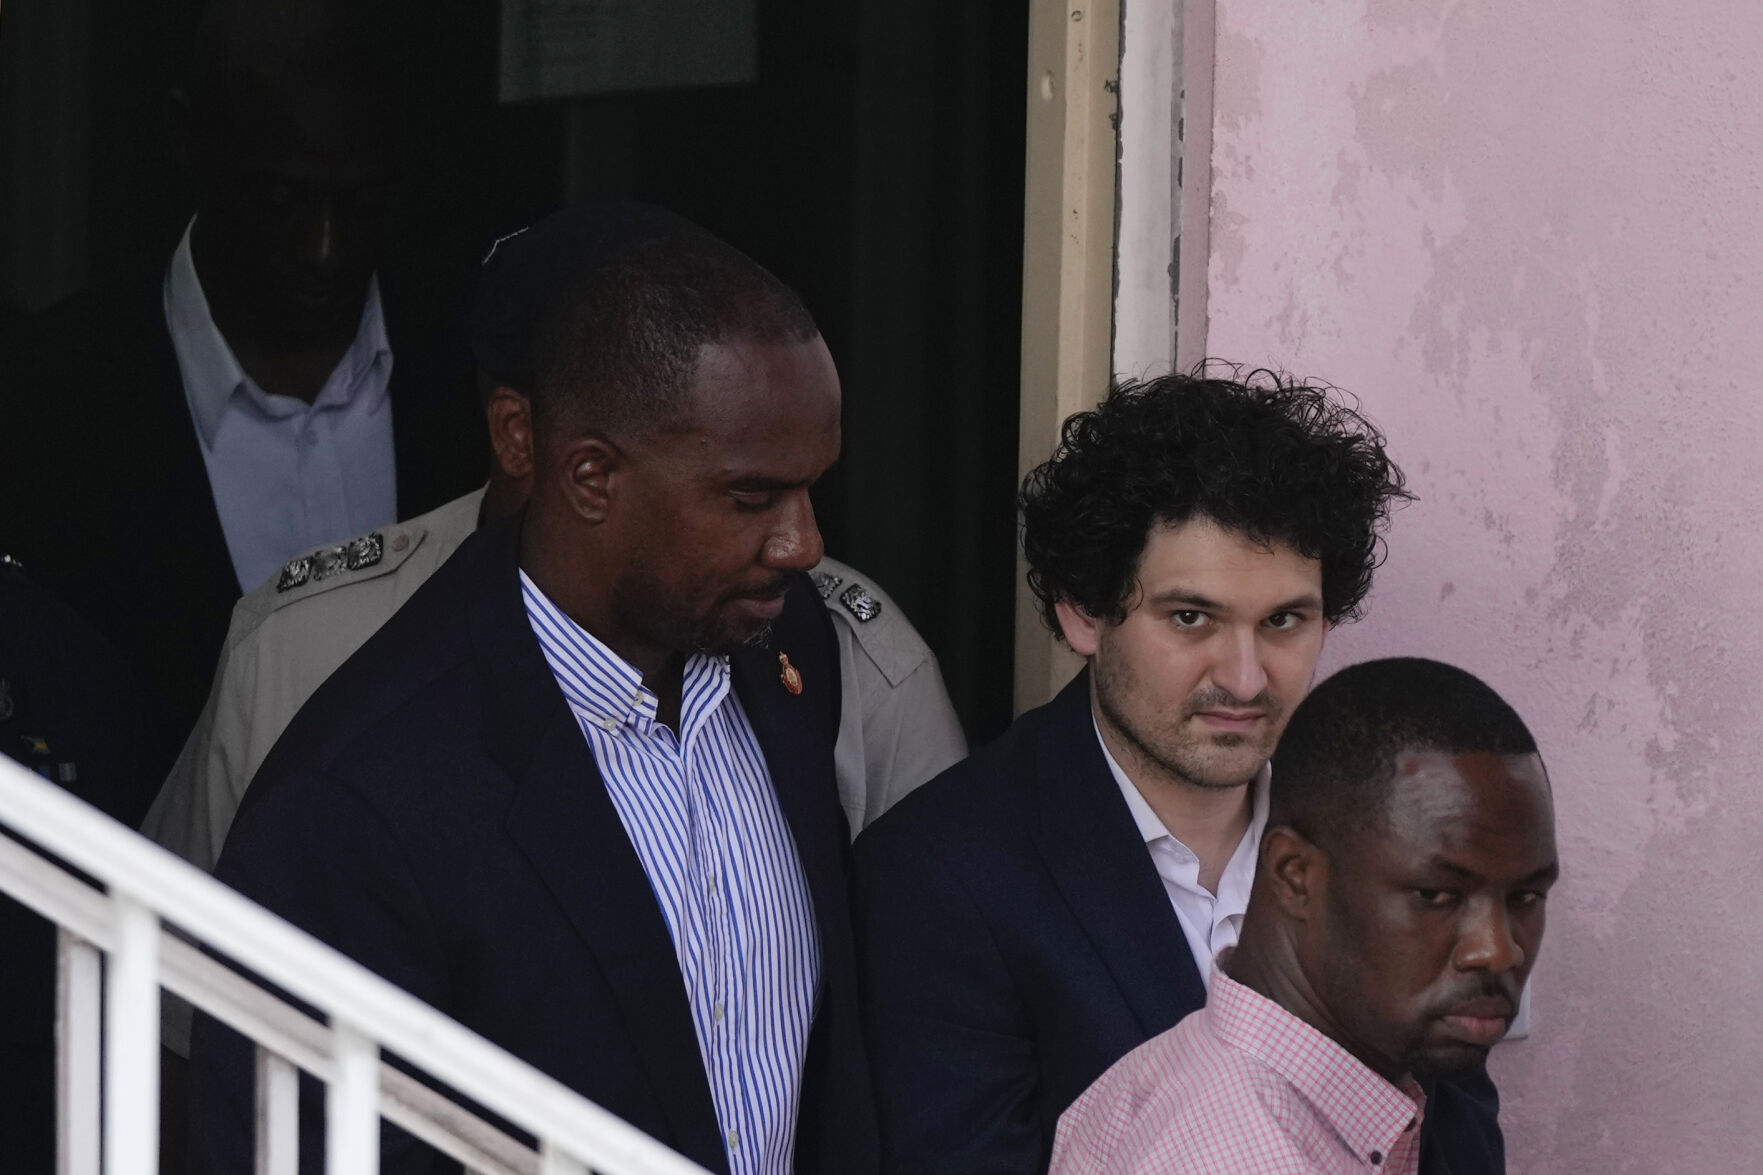 <p>FTX founder Sam Bankman-Fried, second right, is escorted out of Magistrate Court toward a Corrections van, following a hearing in Nassau, Bahamas, Monday, Dec. 19, 2022. (AP Photo/Rebecca Blackwell)</p>   PHOTO CREDIT: Rebecca Blackwell - staff, AP